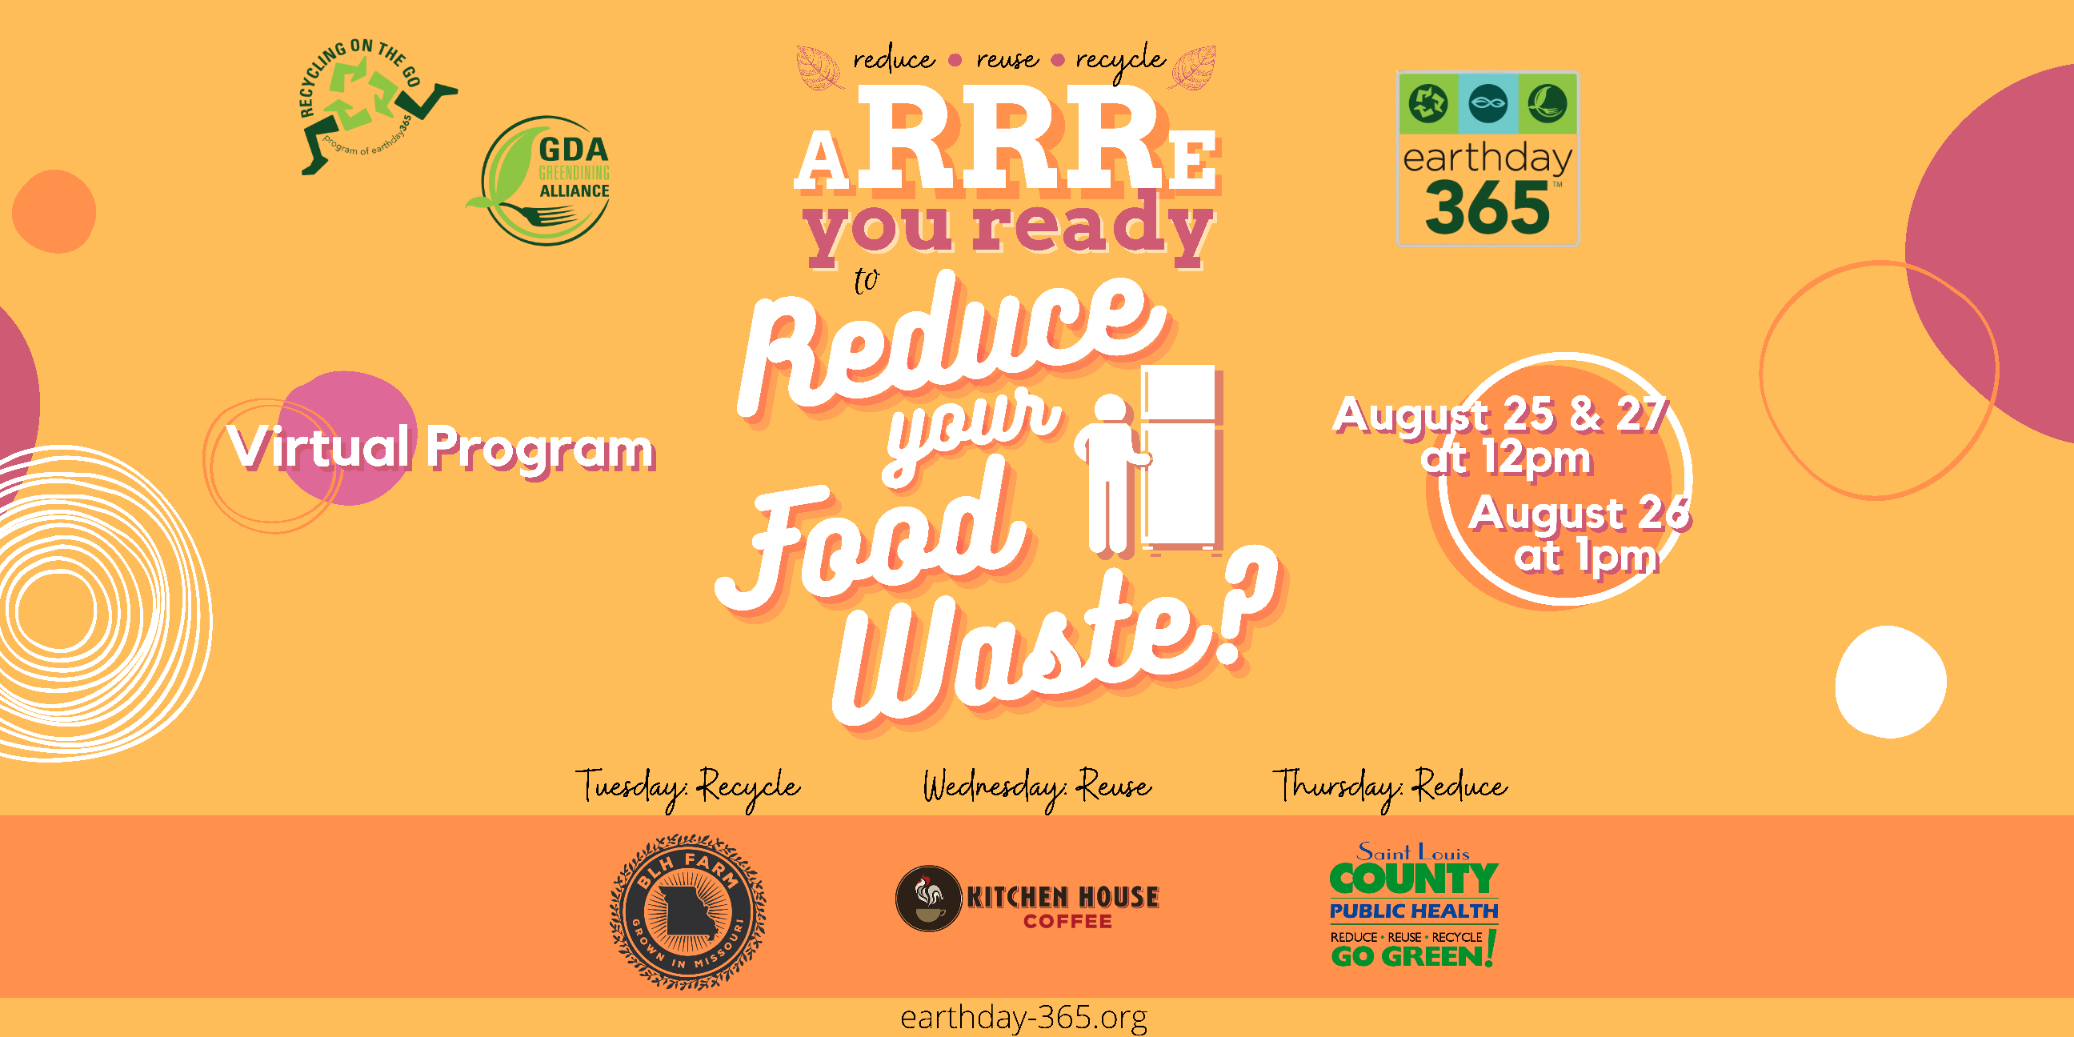 aRRRe You Ready to Reduce Your Food Waste? orange graphic with logos